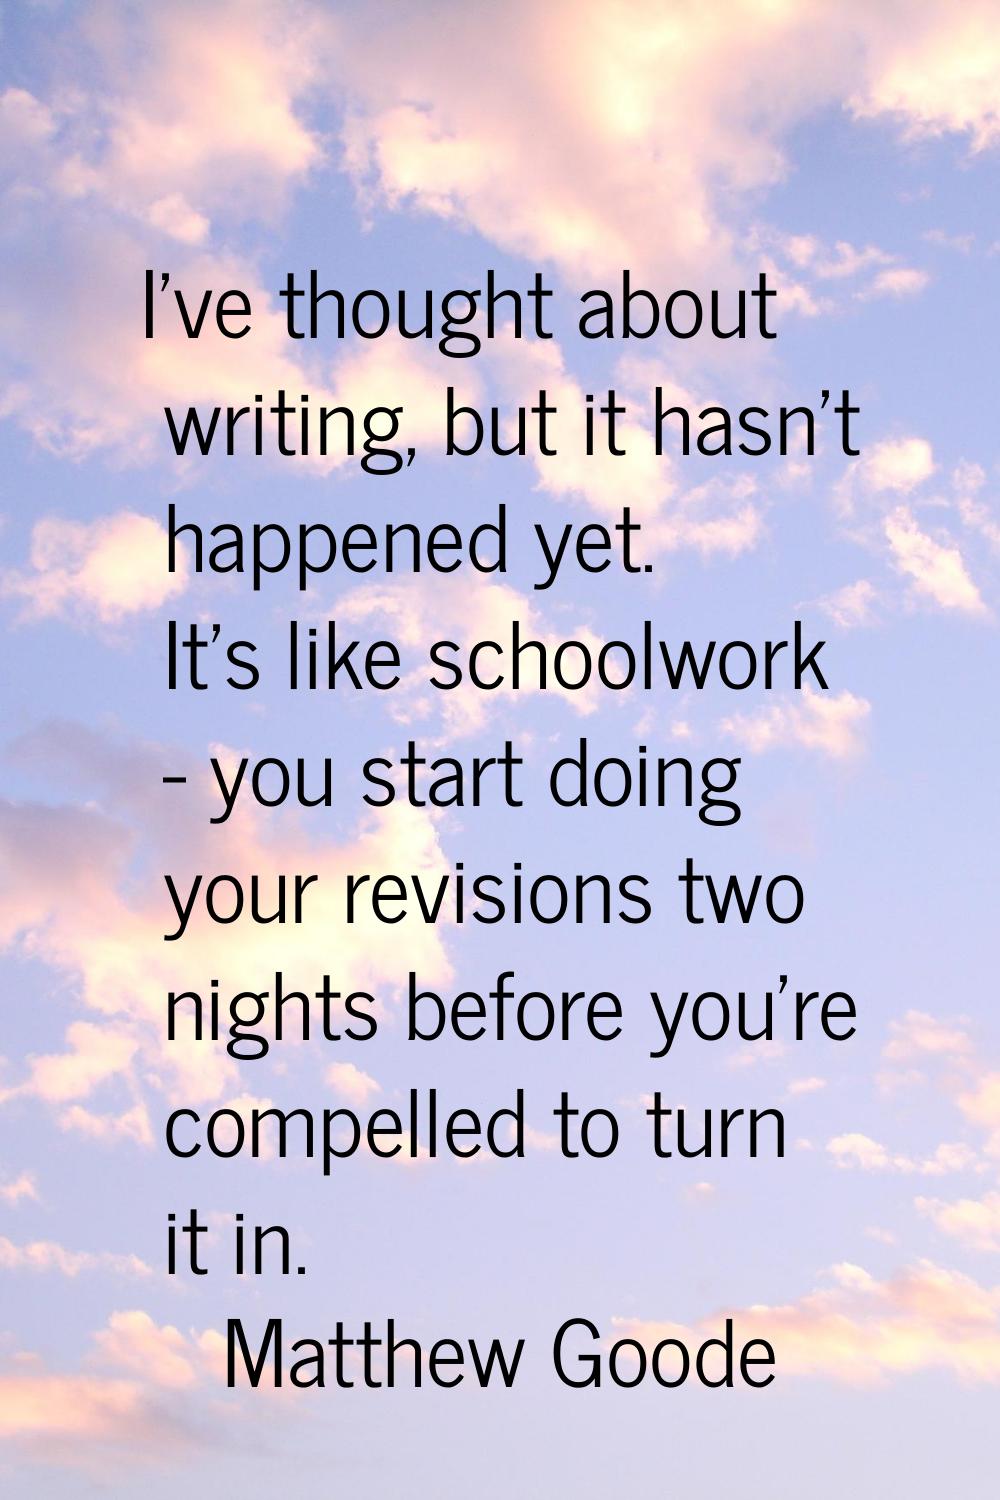 I've thought about writing, but it hasn't happened yet. It's like schoolwork - you start doing your